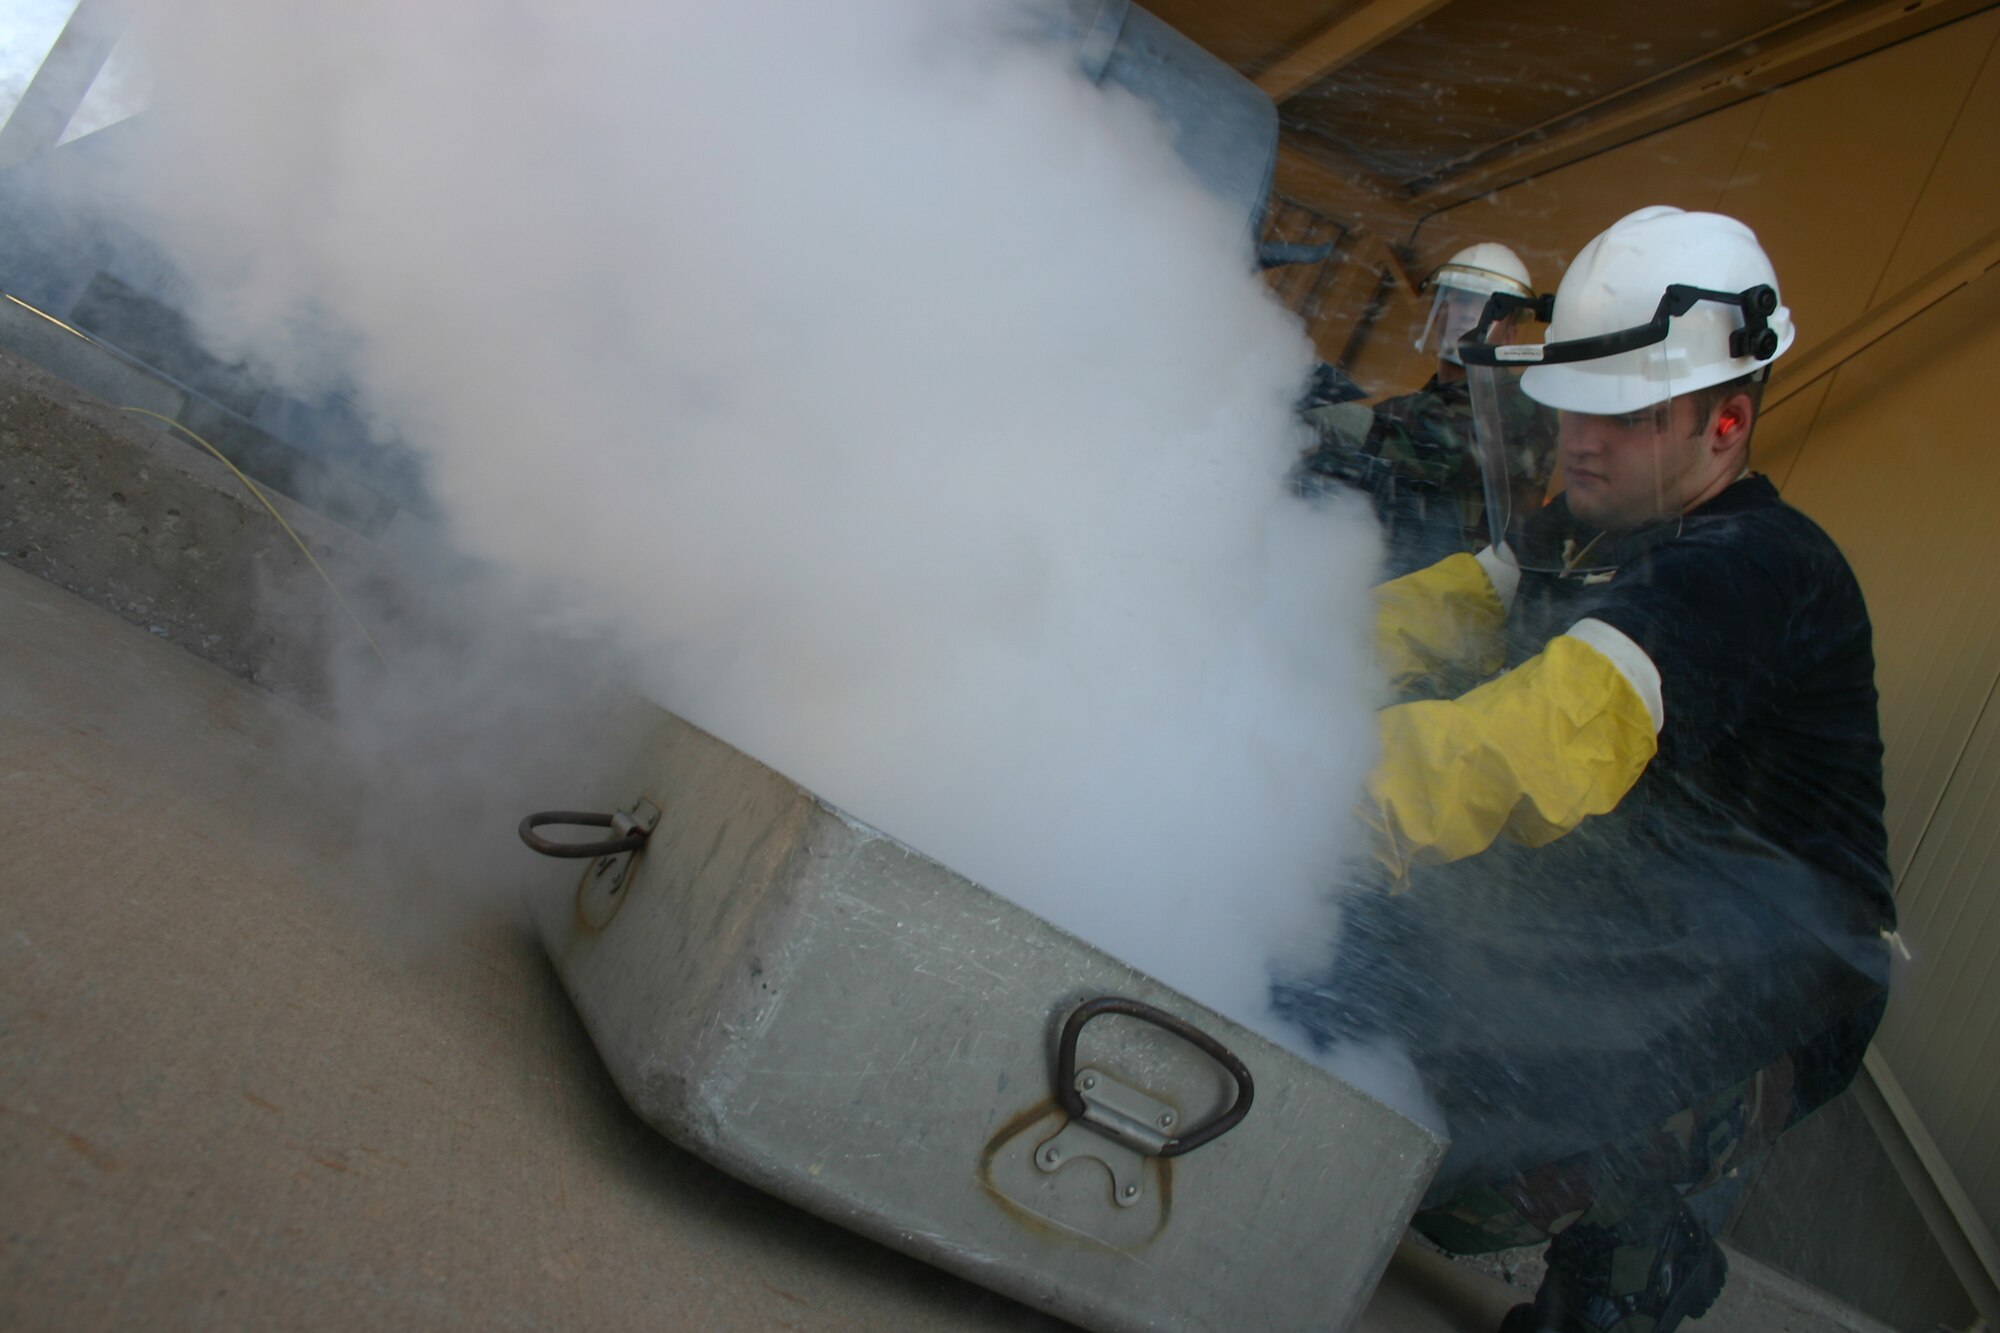 Senior Airman Richard Sharpe, a student from McGuire Air Force Base, N.J., purges a line from a liquid nitrogen tank as Staff Sgt. Richard Hill, a student from Barksdale AFB, La., controls the valves of the tank. Students use liquid nitrogen instead of liquid oxygen for safety purposes during training. (U.S. Air Force photo by John Ingle)